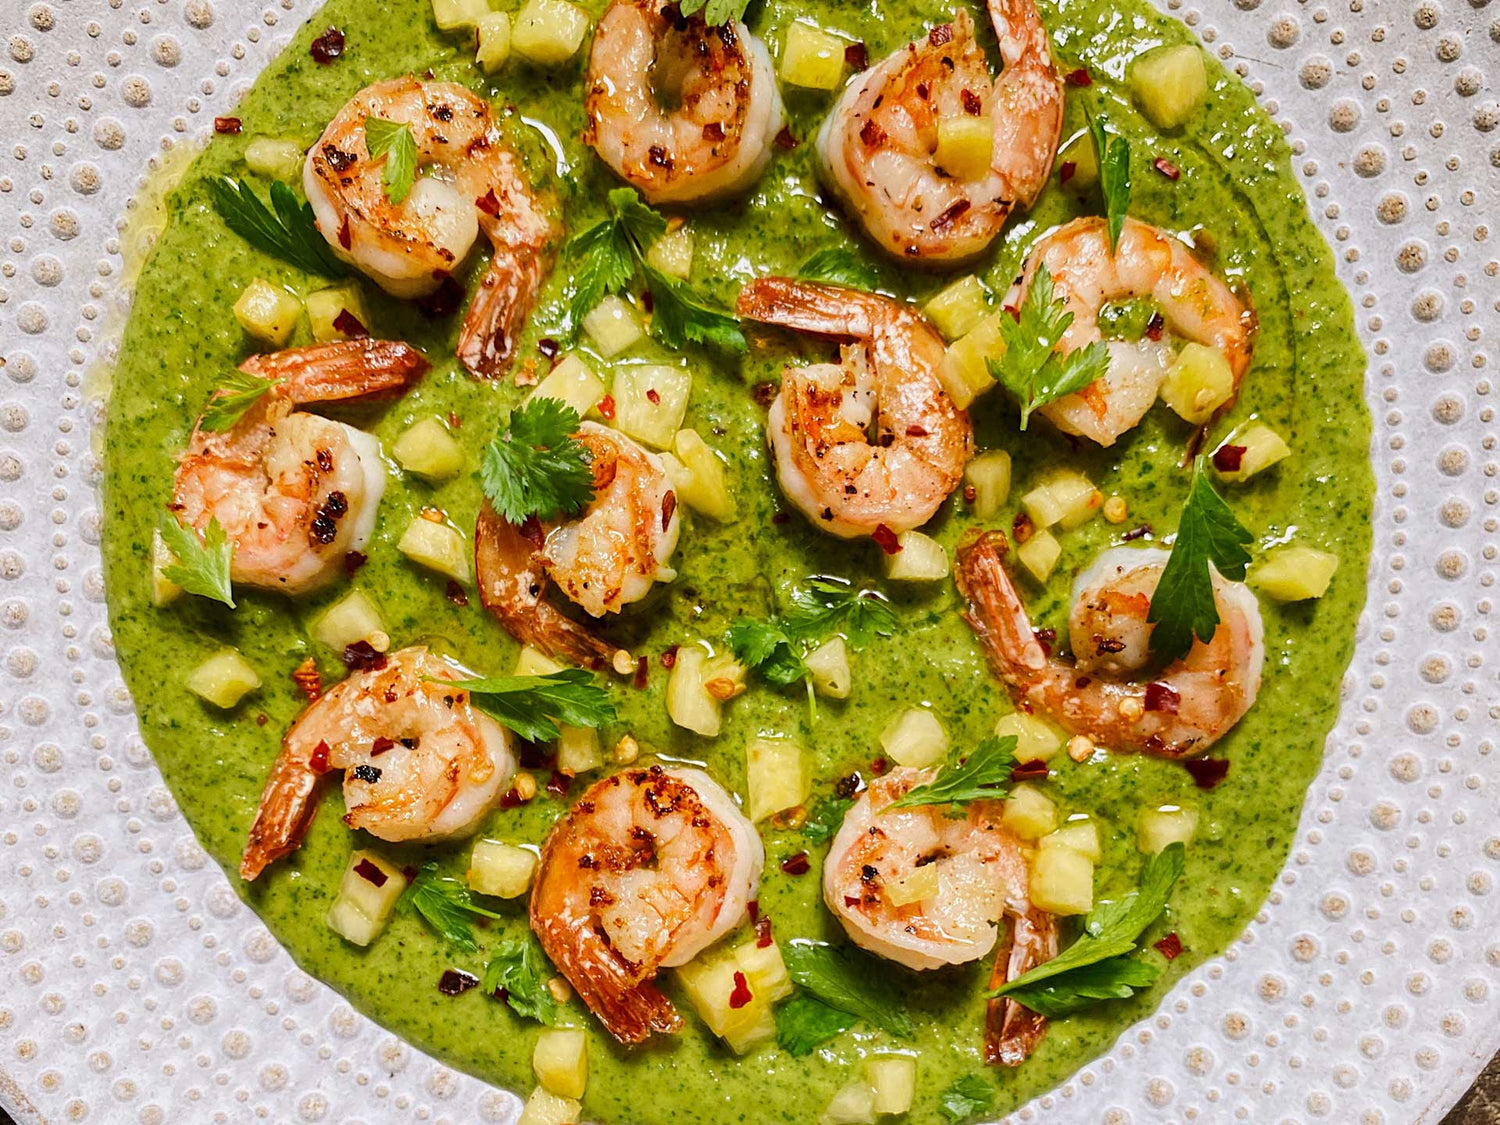 Shrimp and chimichurri with pineapple and relish